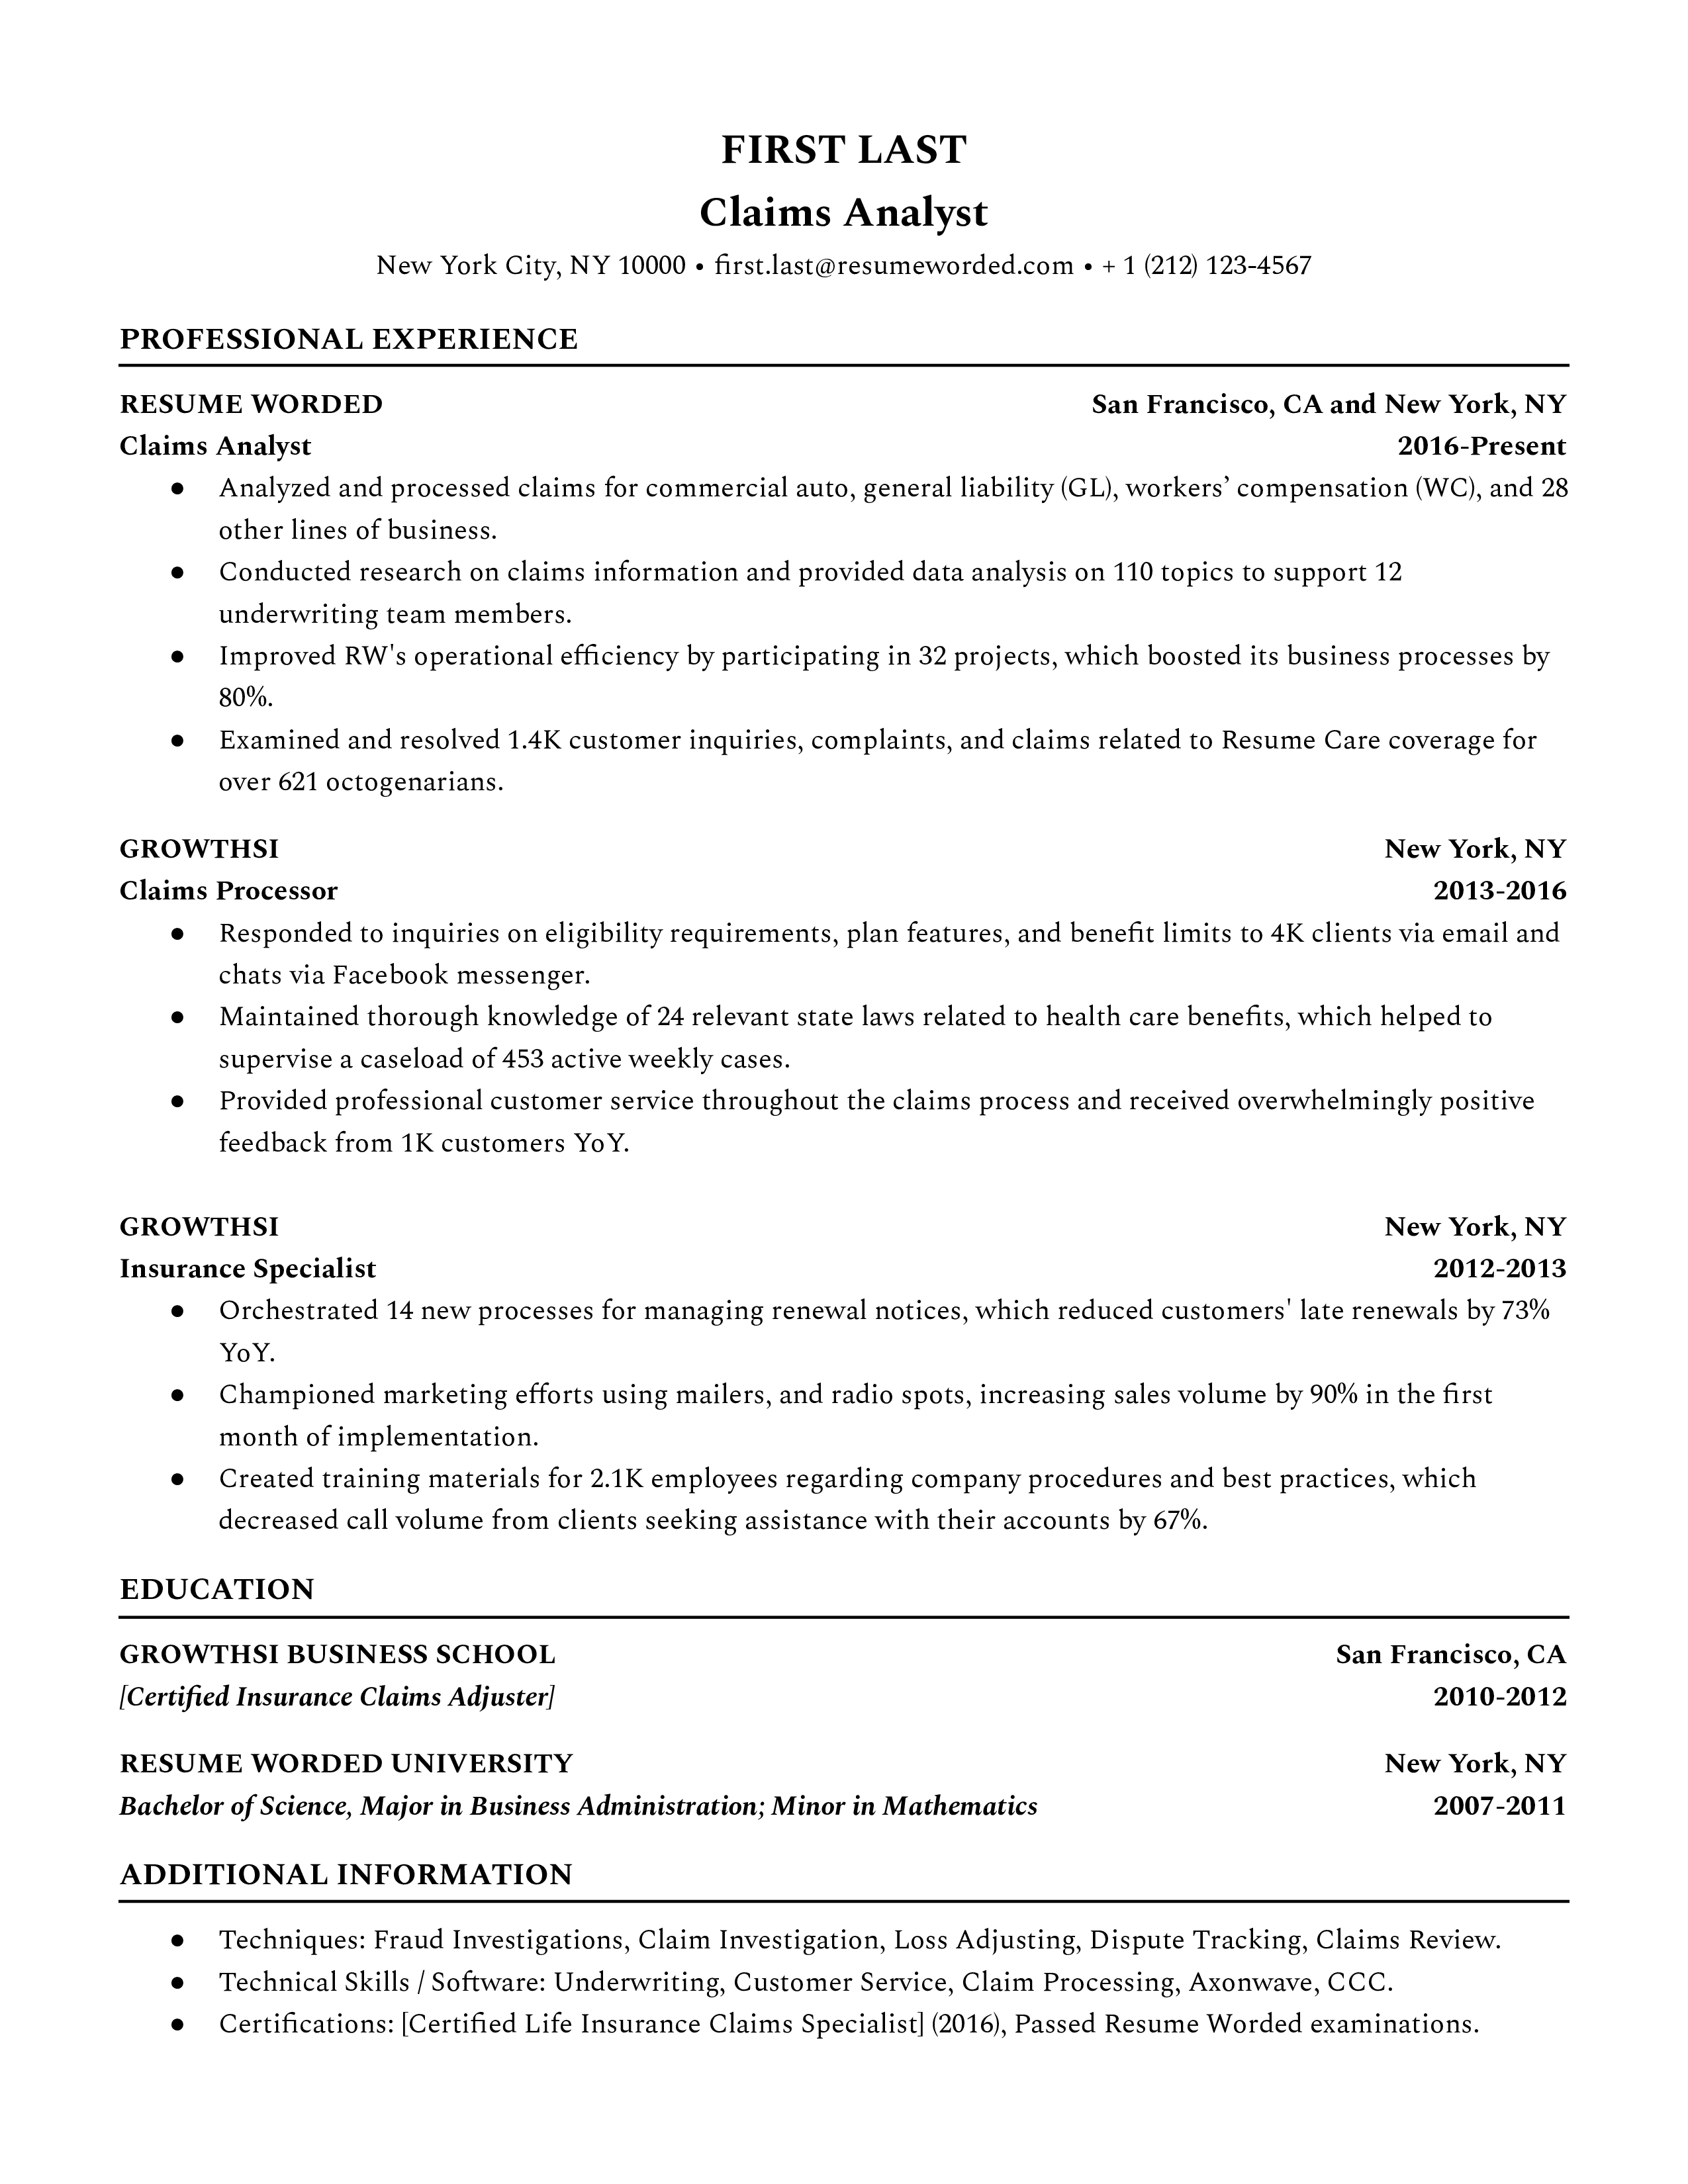 Claims Analyst Resume Sample